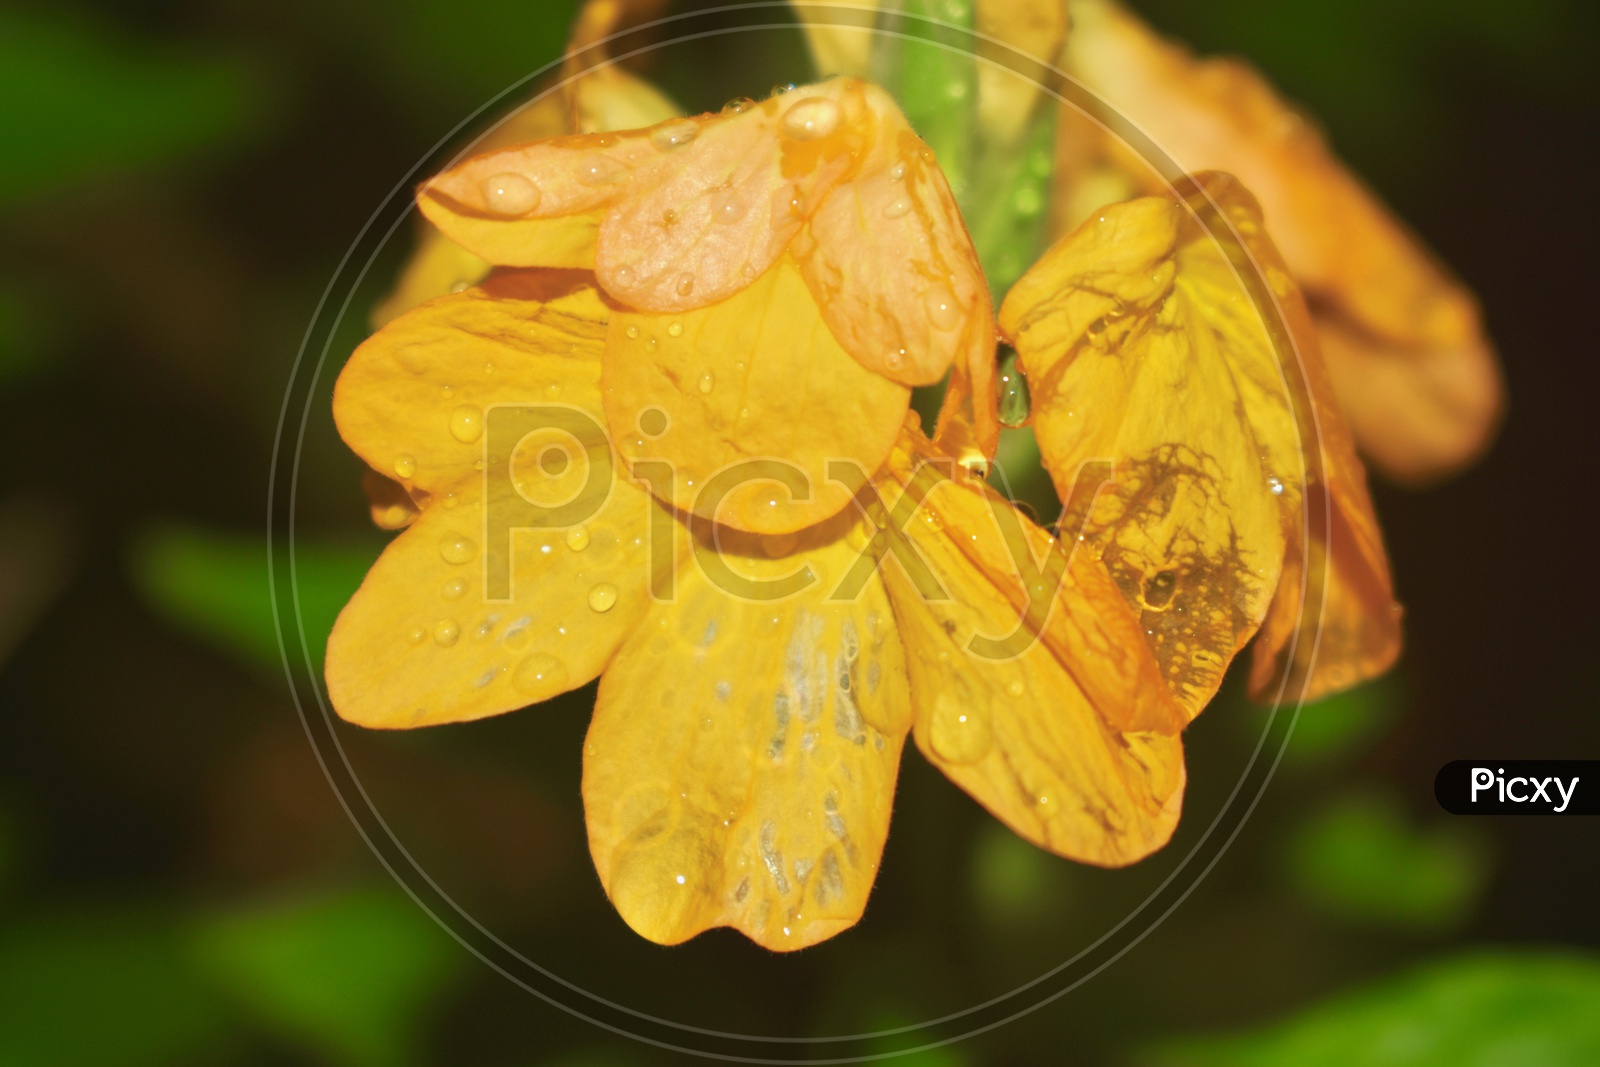 Flowers with rain droplets